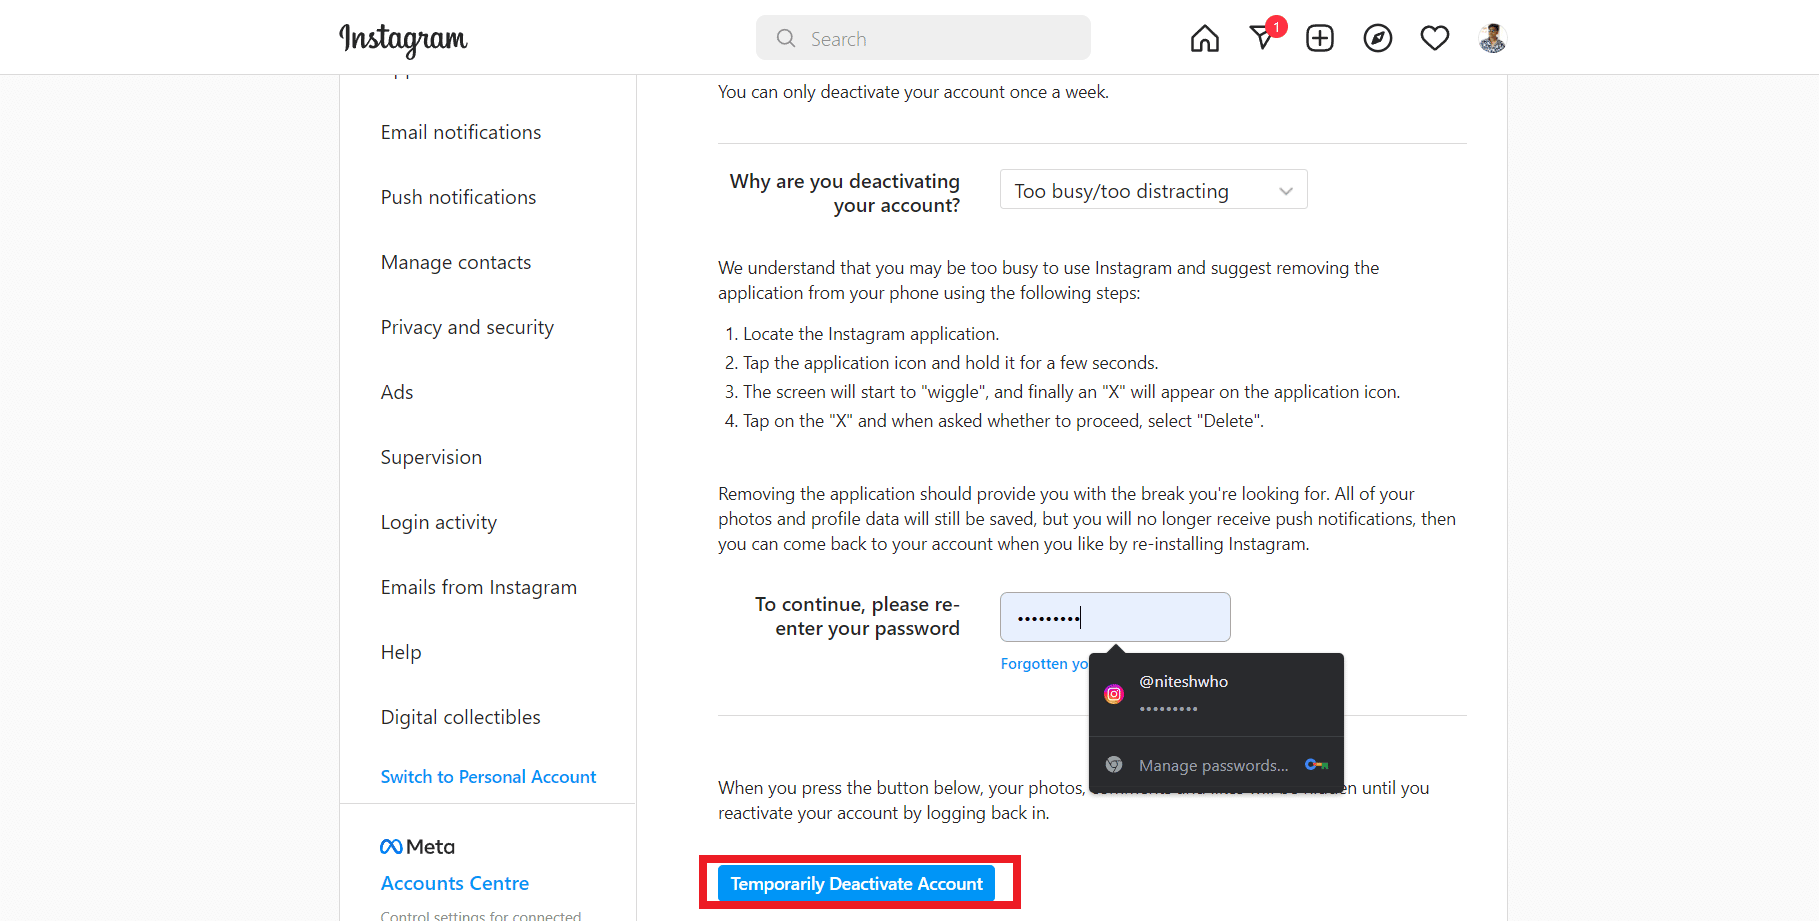 Select the Temporarily Deactivate Account option.